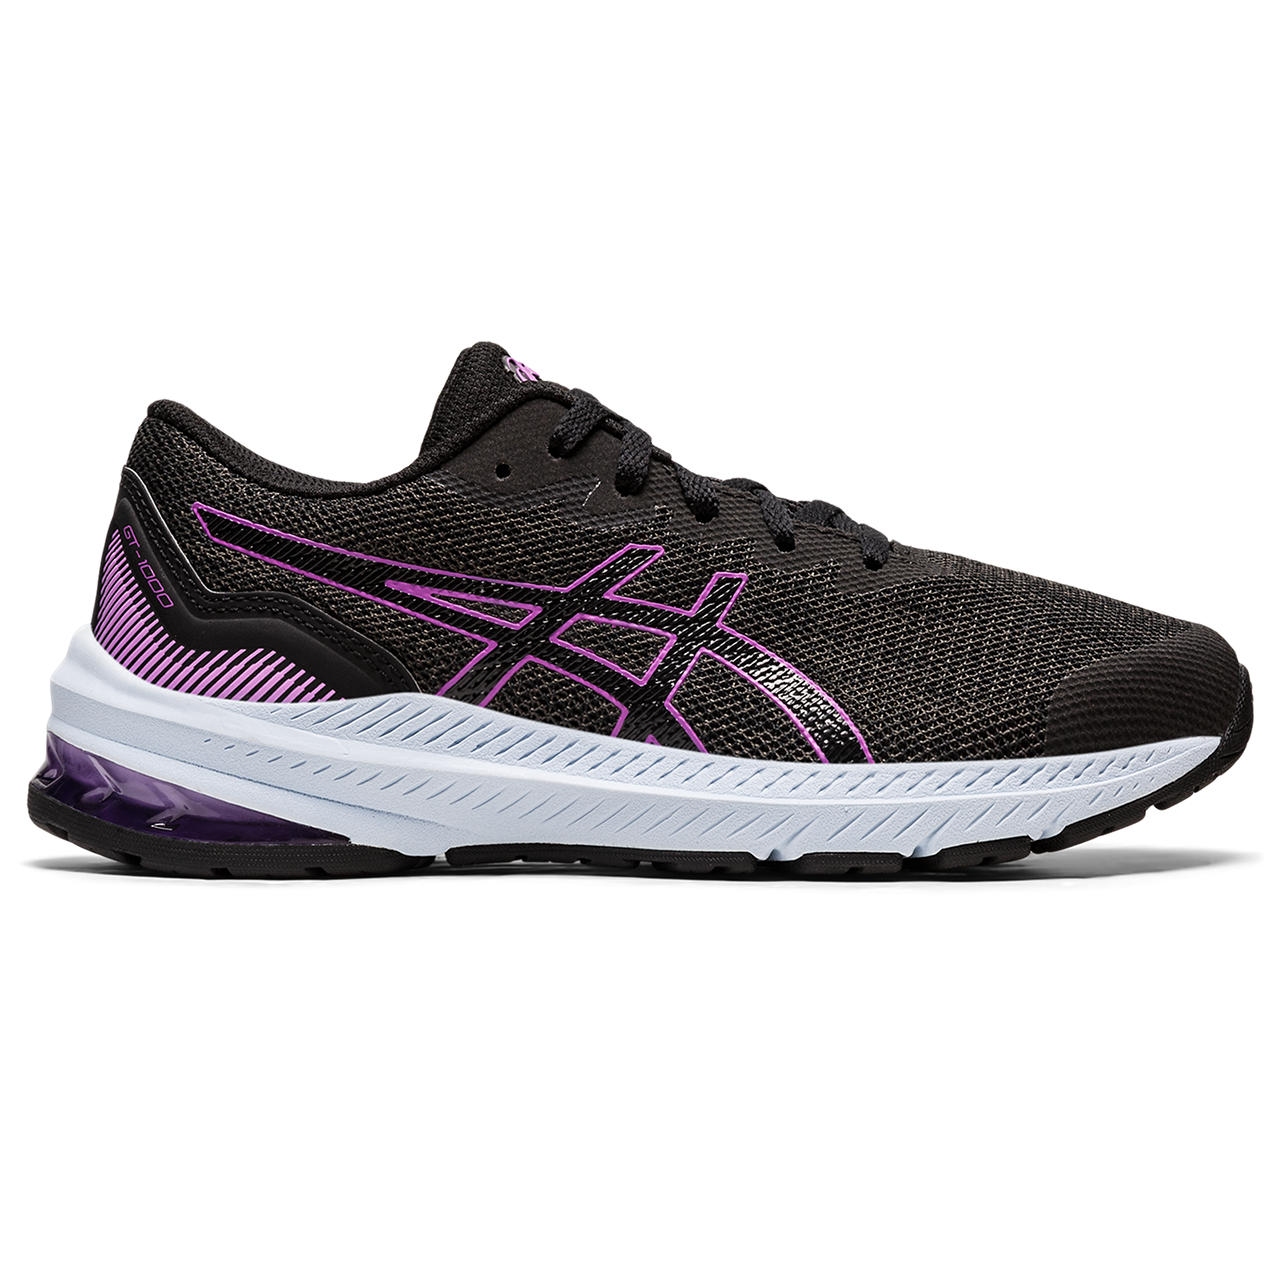 Image of asics GT-1000 11 GS Running Shoe Kids - graphite grey/orchid